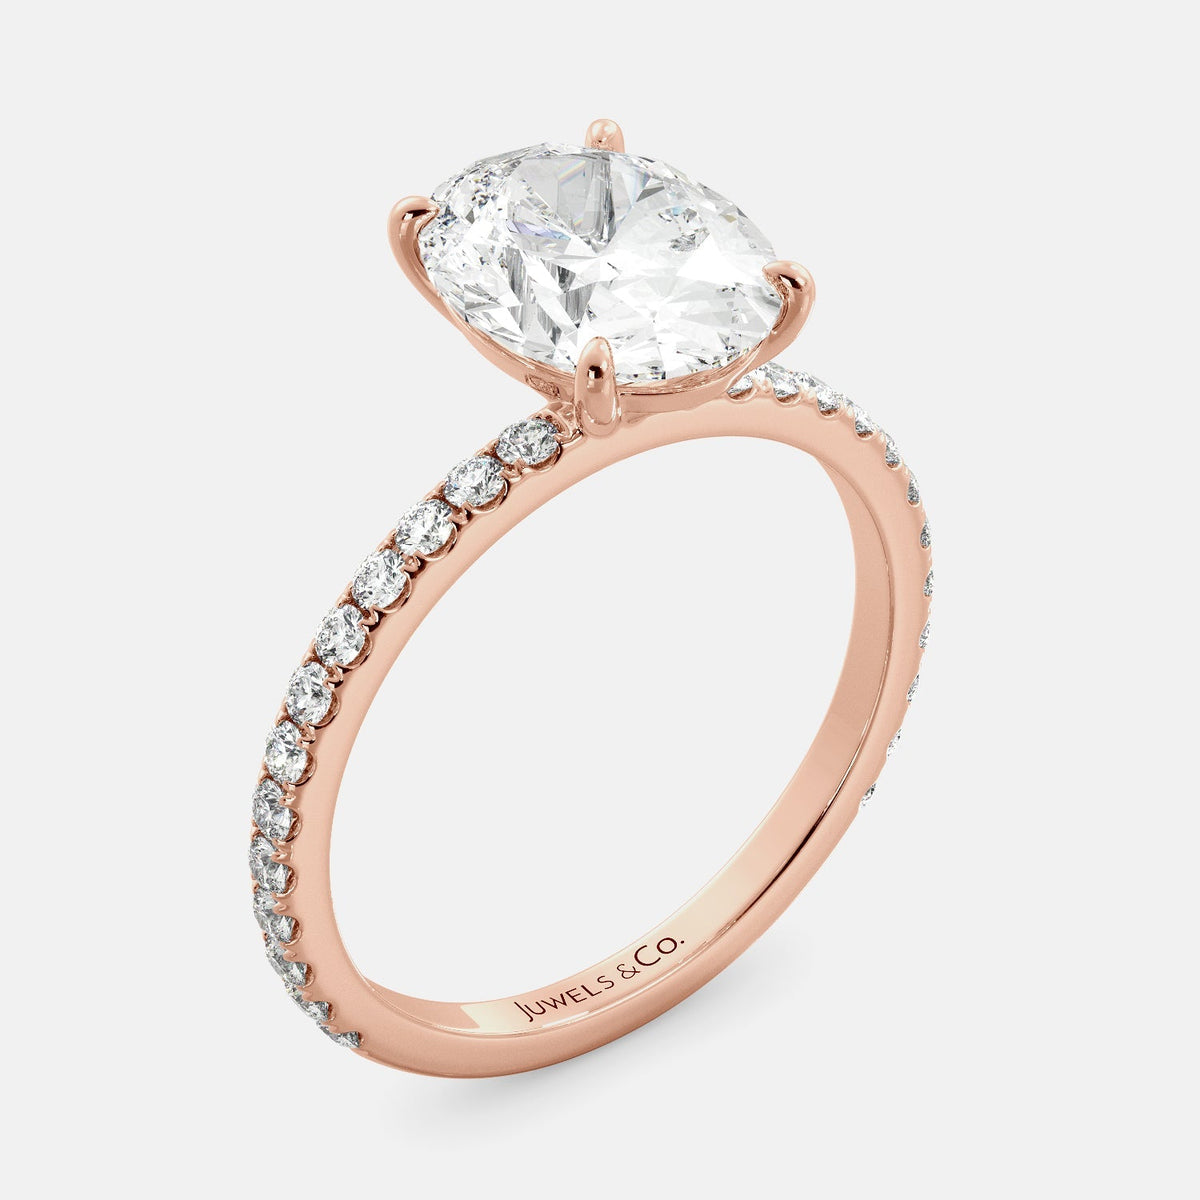 Lab-grown Oval Cut Diamond Ring with pave, 2 carat, rose gold 14K